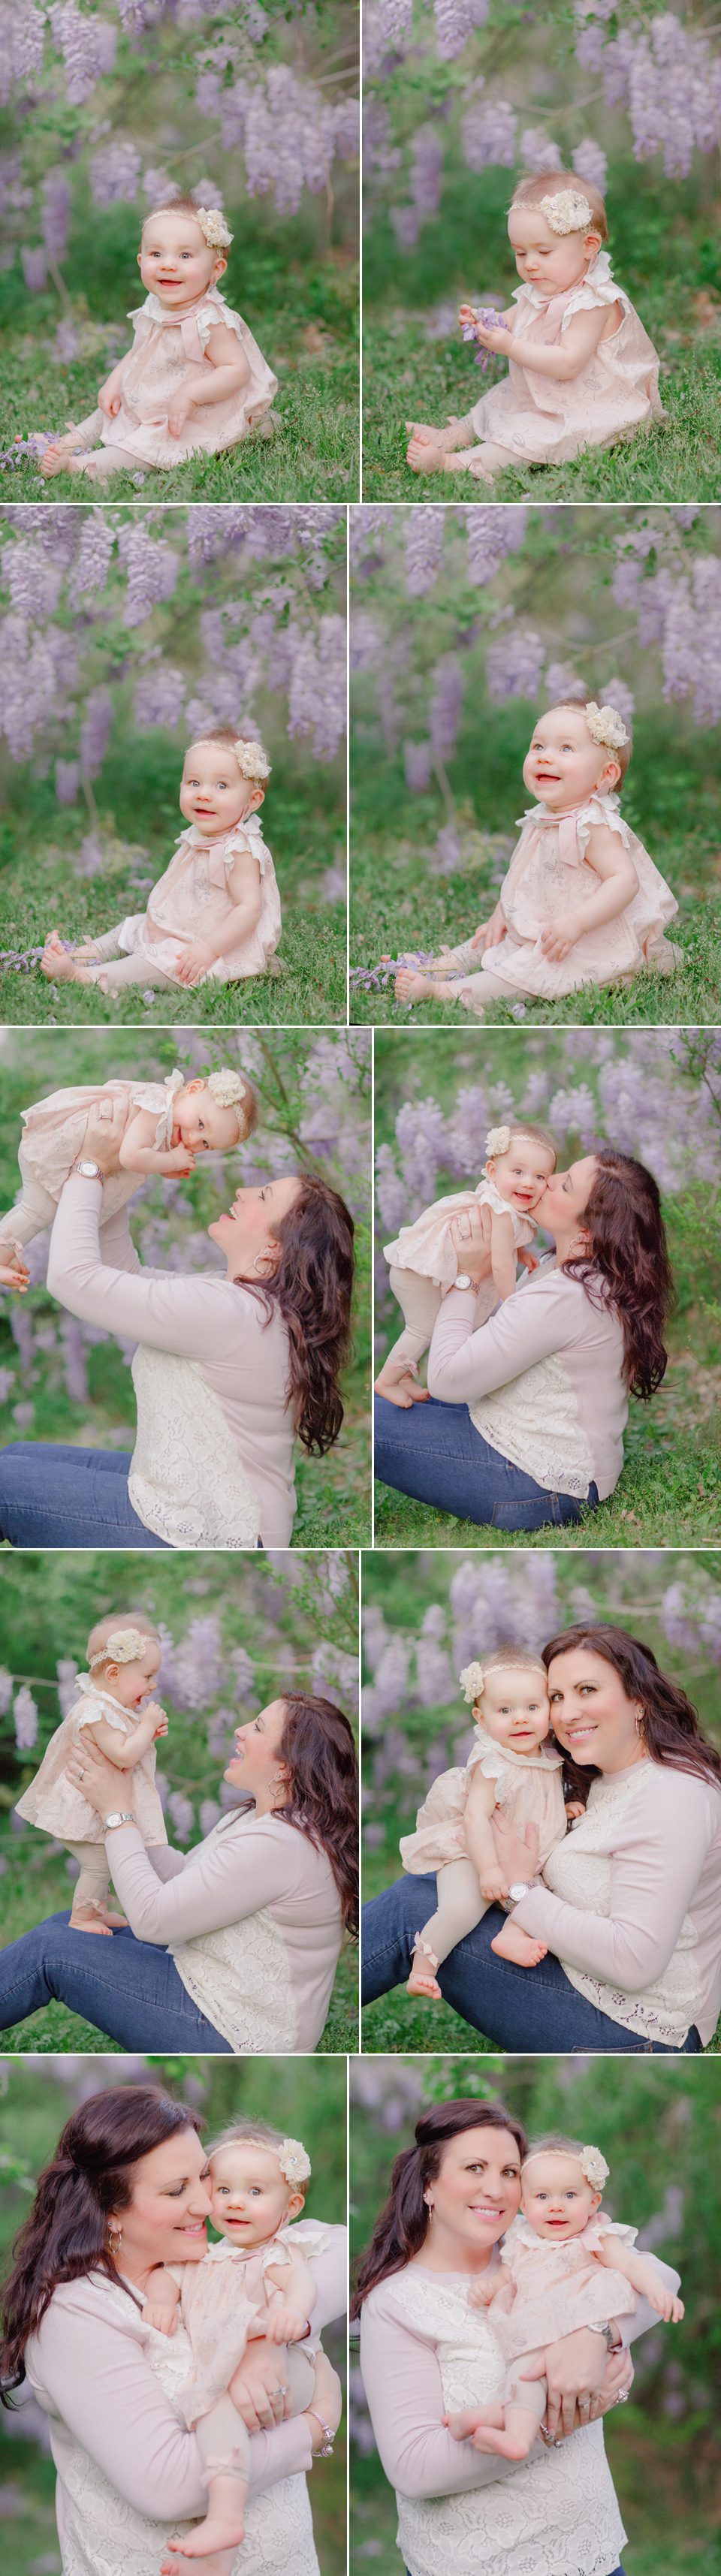 Portraits showing love between mother and daughter surrounded by Spring wisteria near Athens, GA.